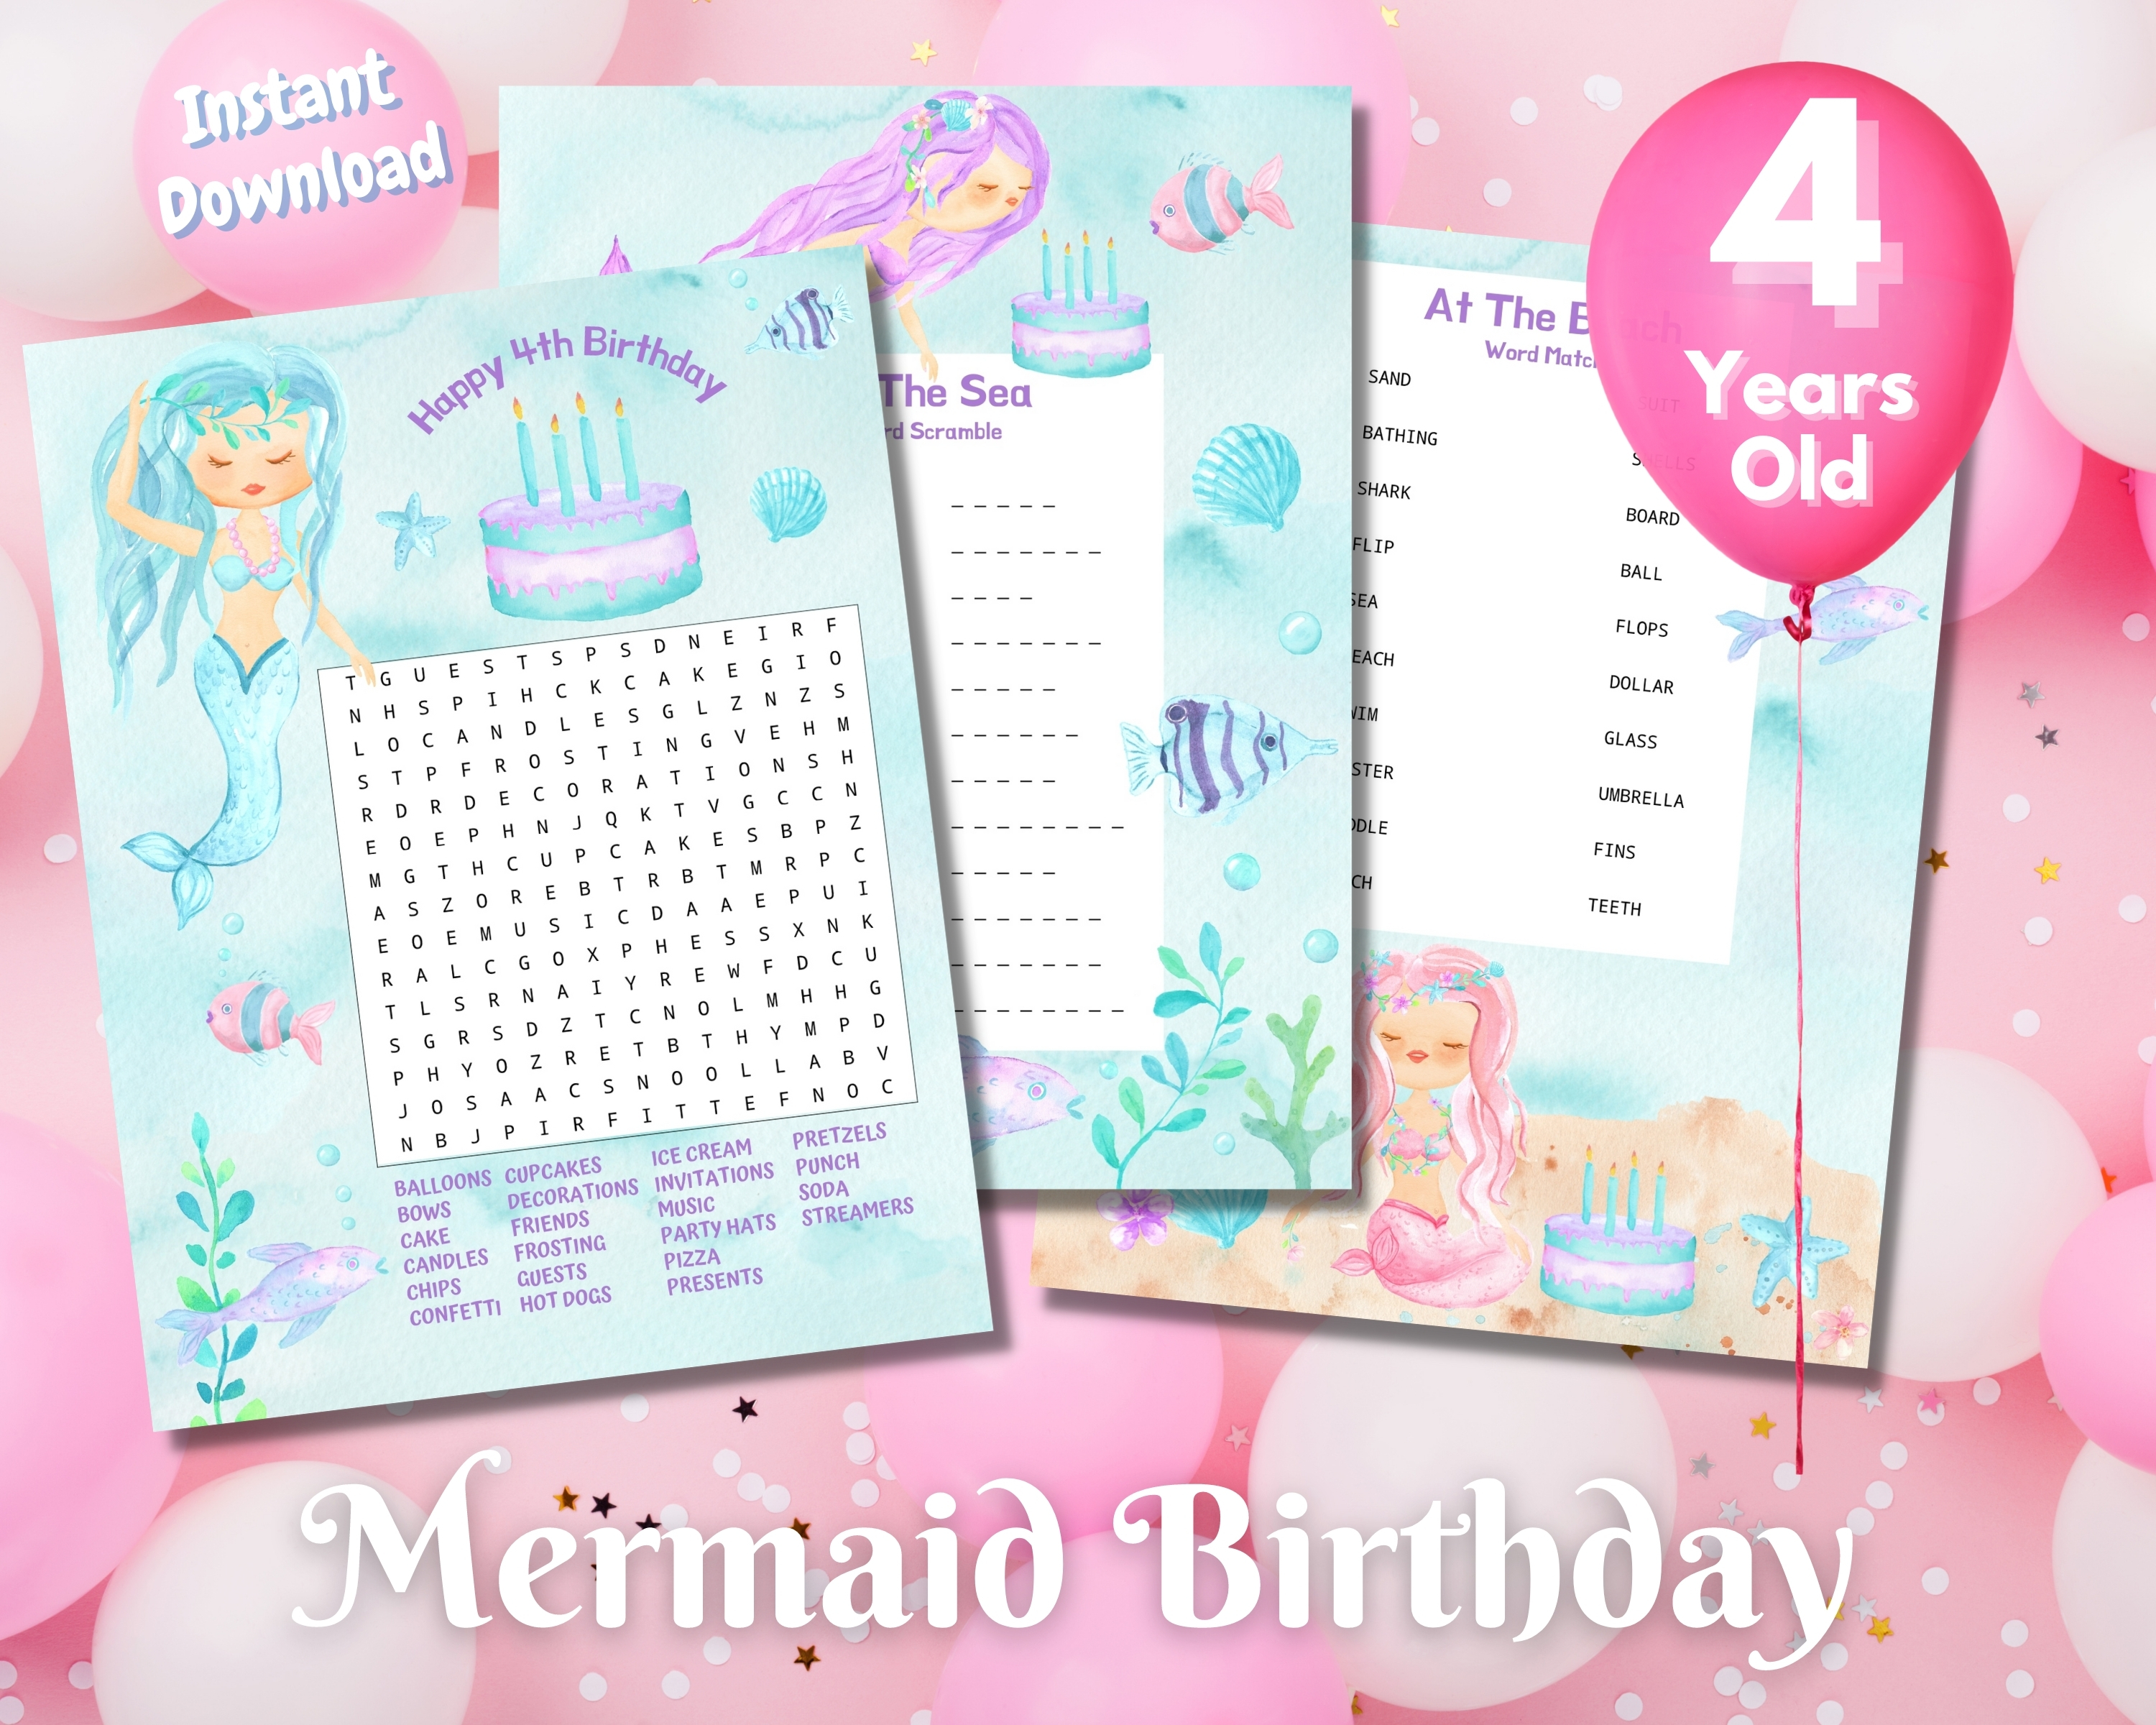 Fourth Mermaid Birthday Word Puzzles - Light Complexion